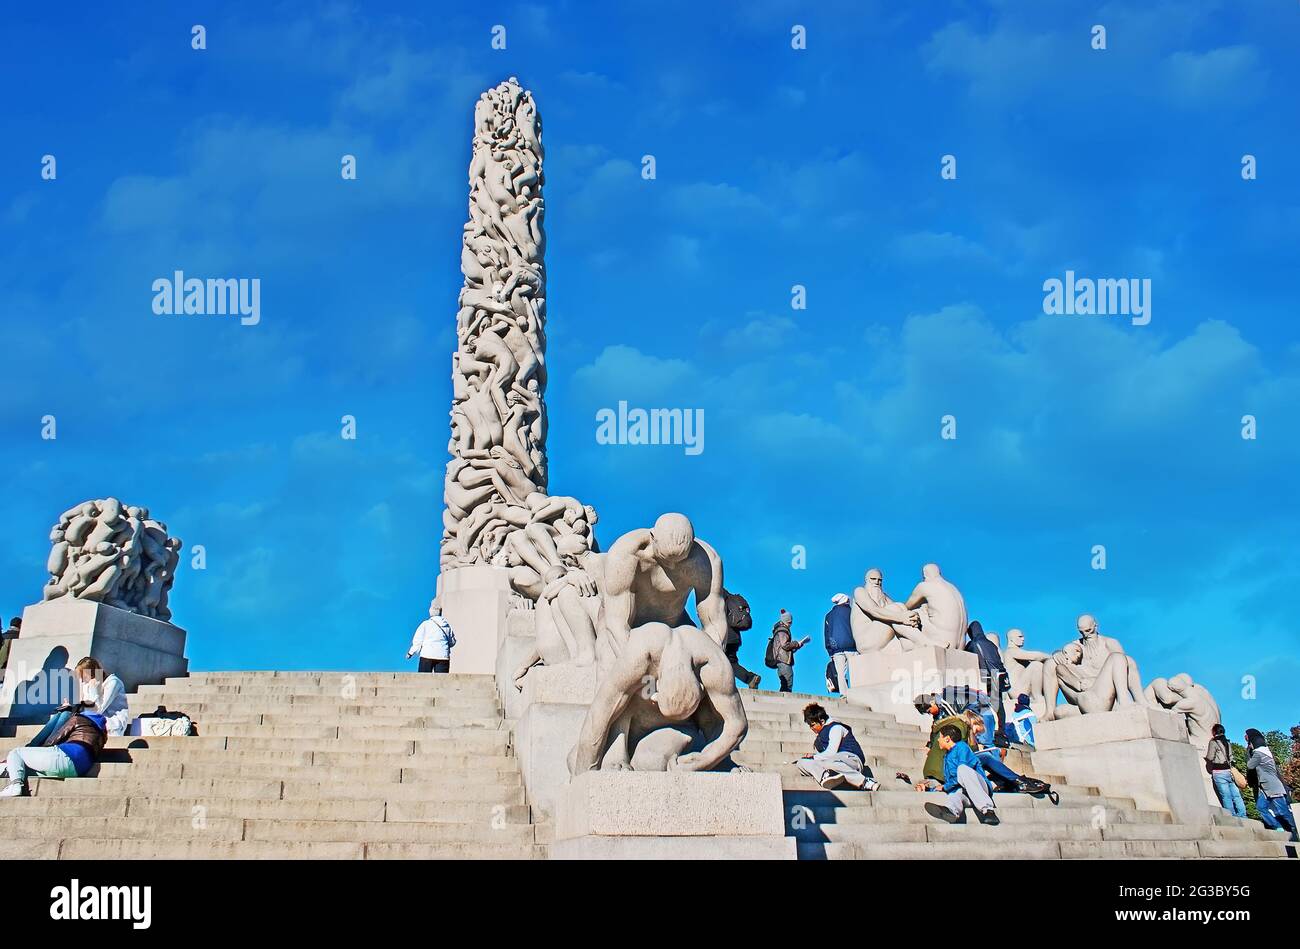 OSLO, NORWAY - SEP 28, 2010: The granite sculptures and totem of Monolith sculptural group of Vigeland Installation, located in Frogner Park, on Sep 2 Stock Photo